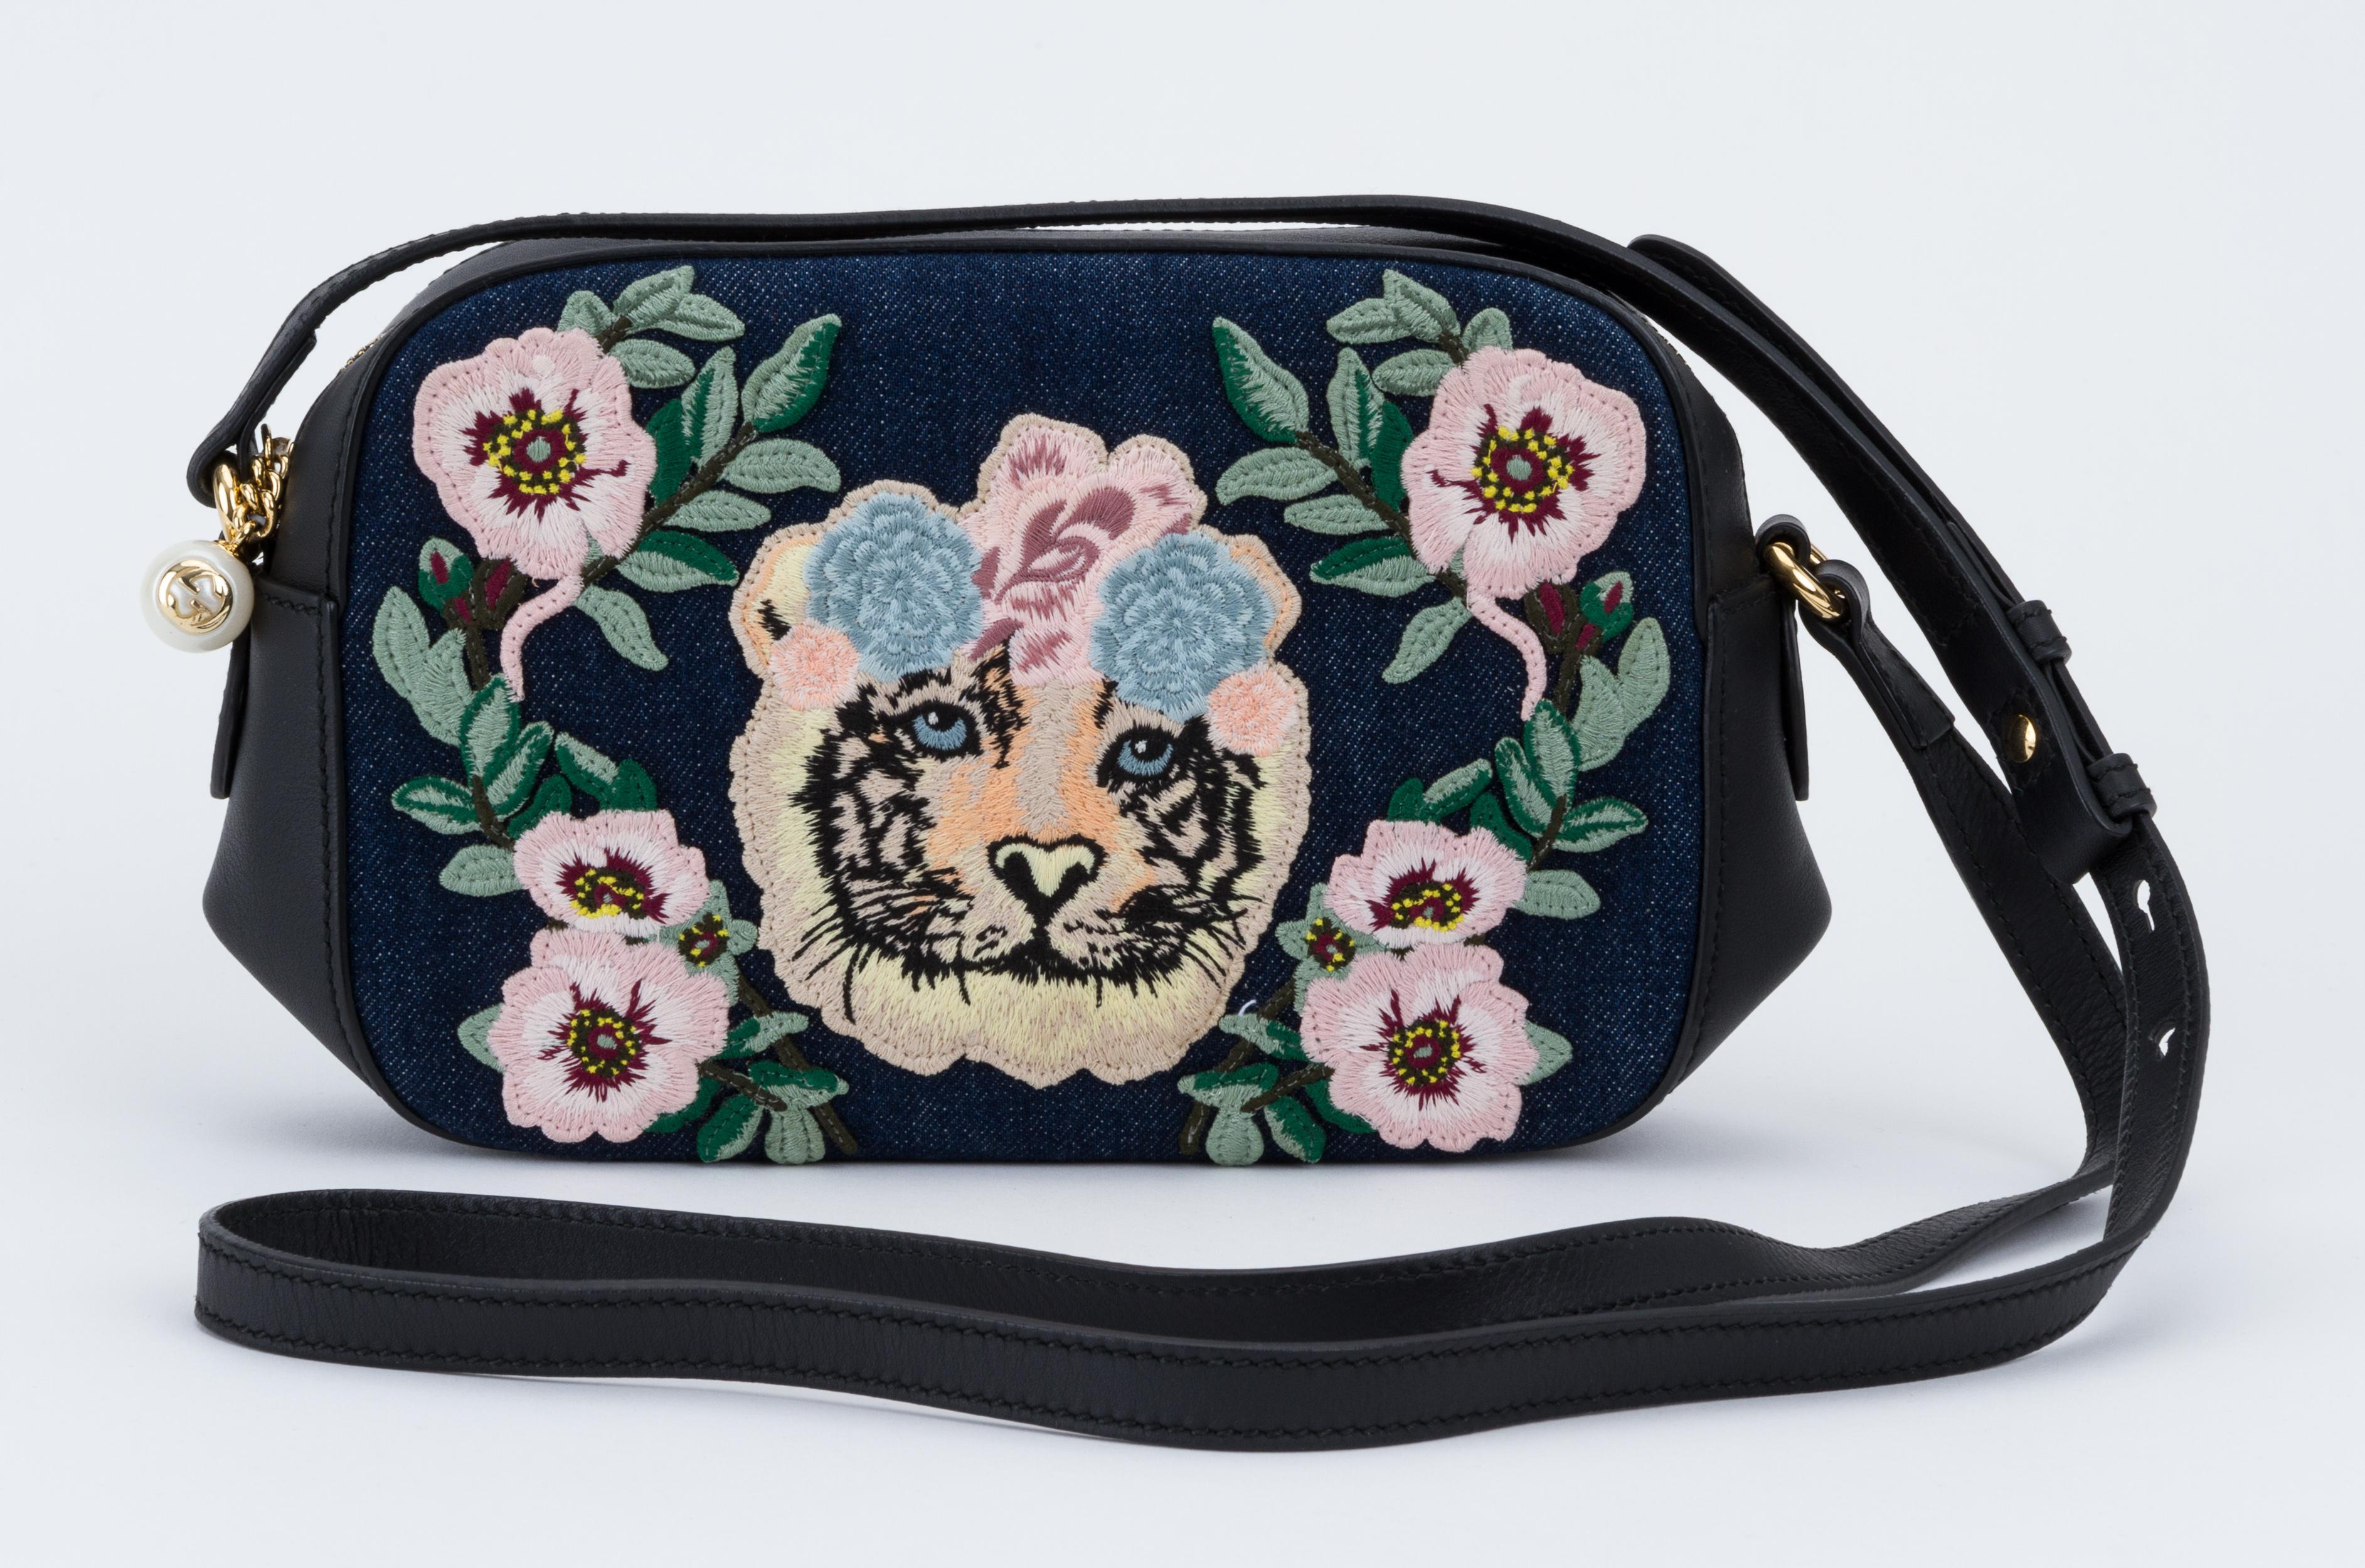 Gucci Japan exclusive collection, black leather and denim cross body. Embroidered tiger and flowers. Shoulder drop 23